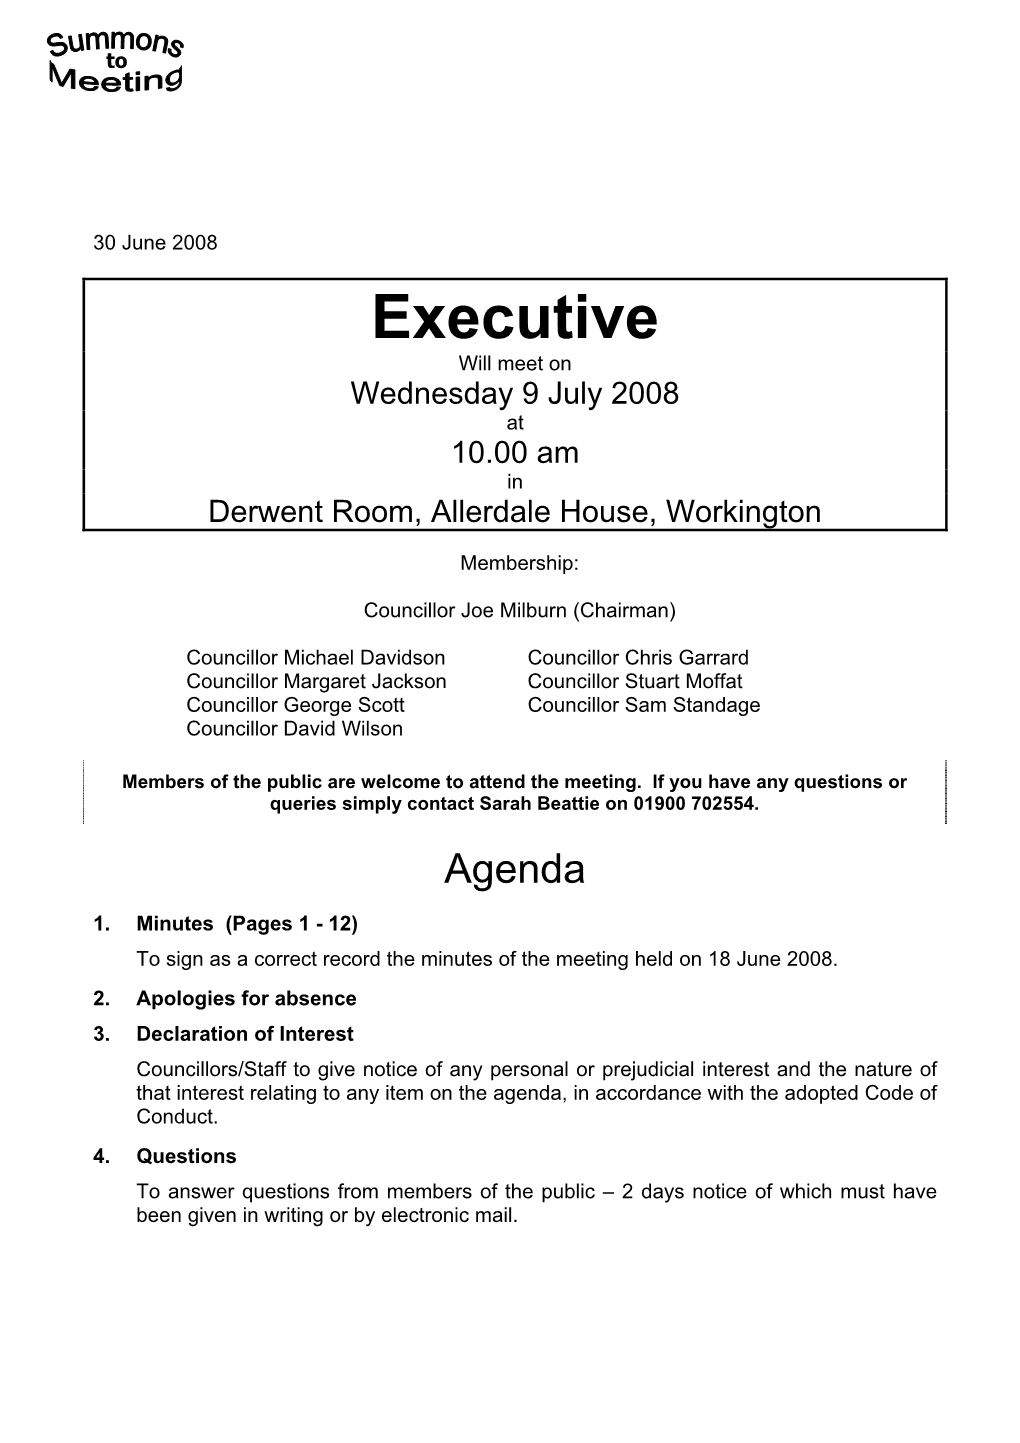 Executive Will Meet on Wednesday 9 July 2008 at 10.00 Am in Derwent Room, Allerdale House, Workington